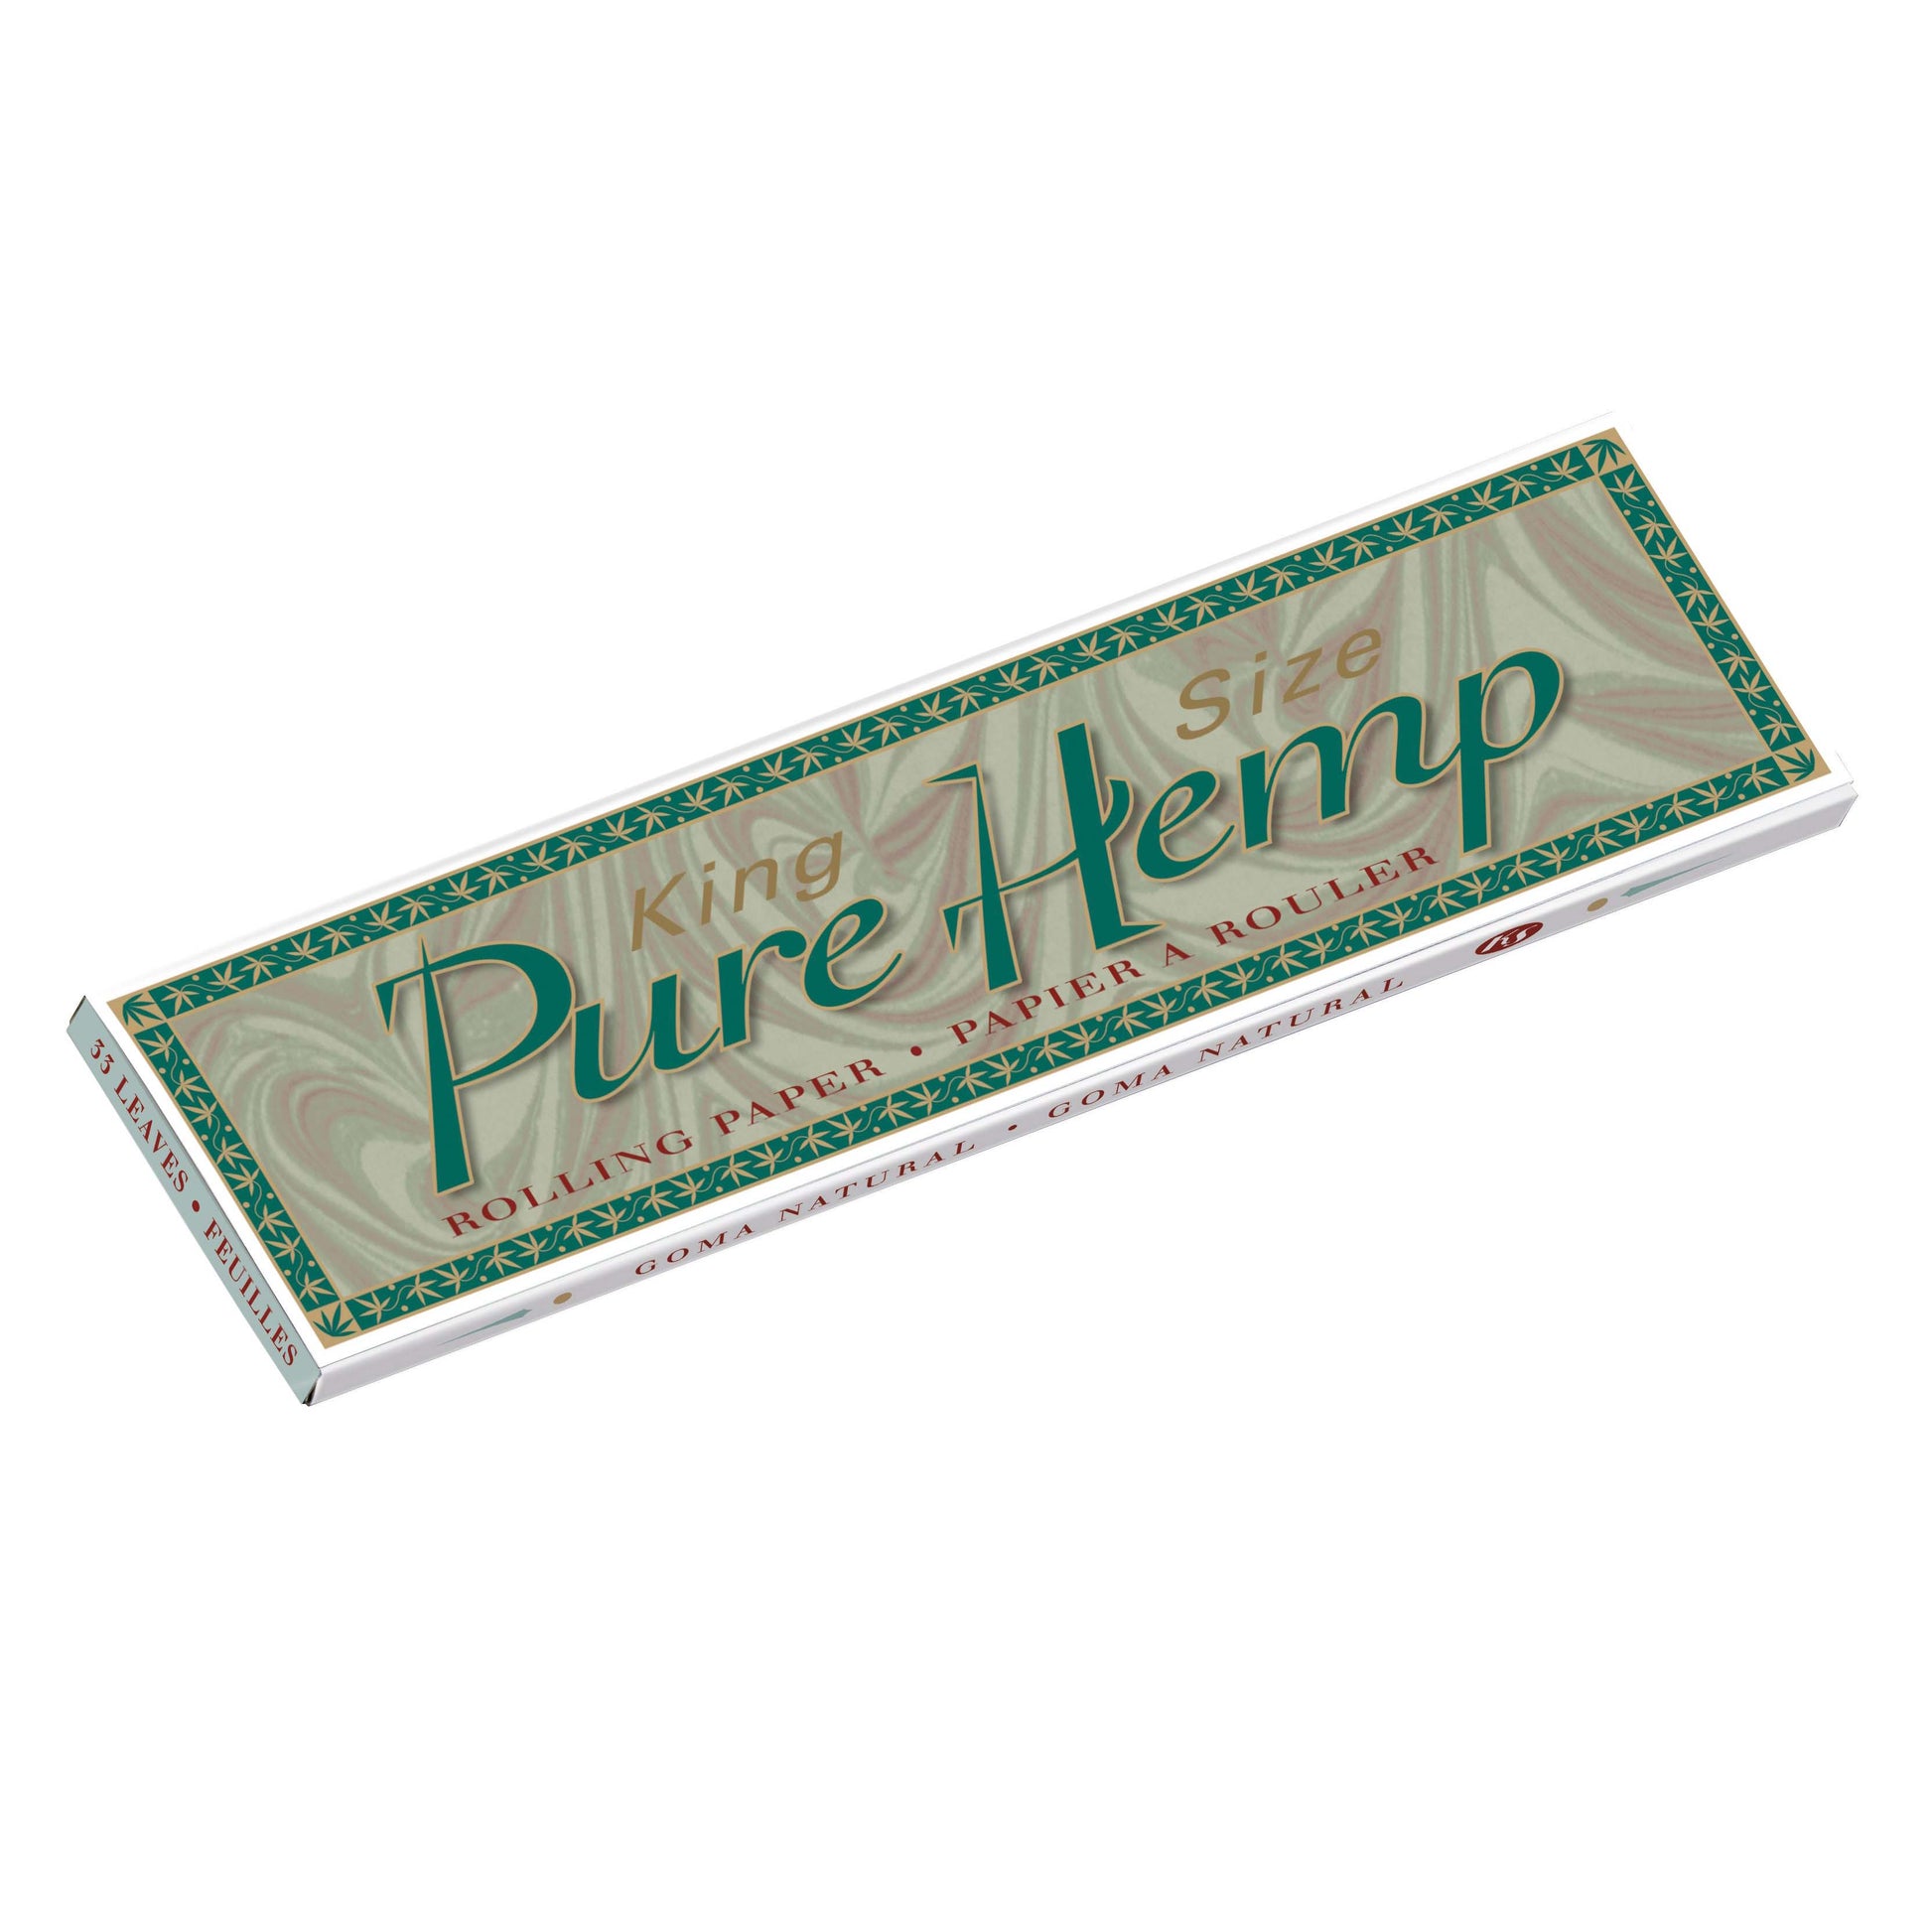 Pure Hemp King Size Flower Power Packages 